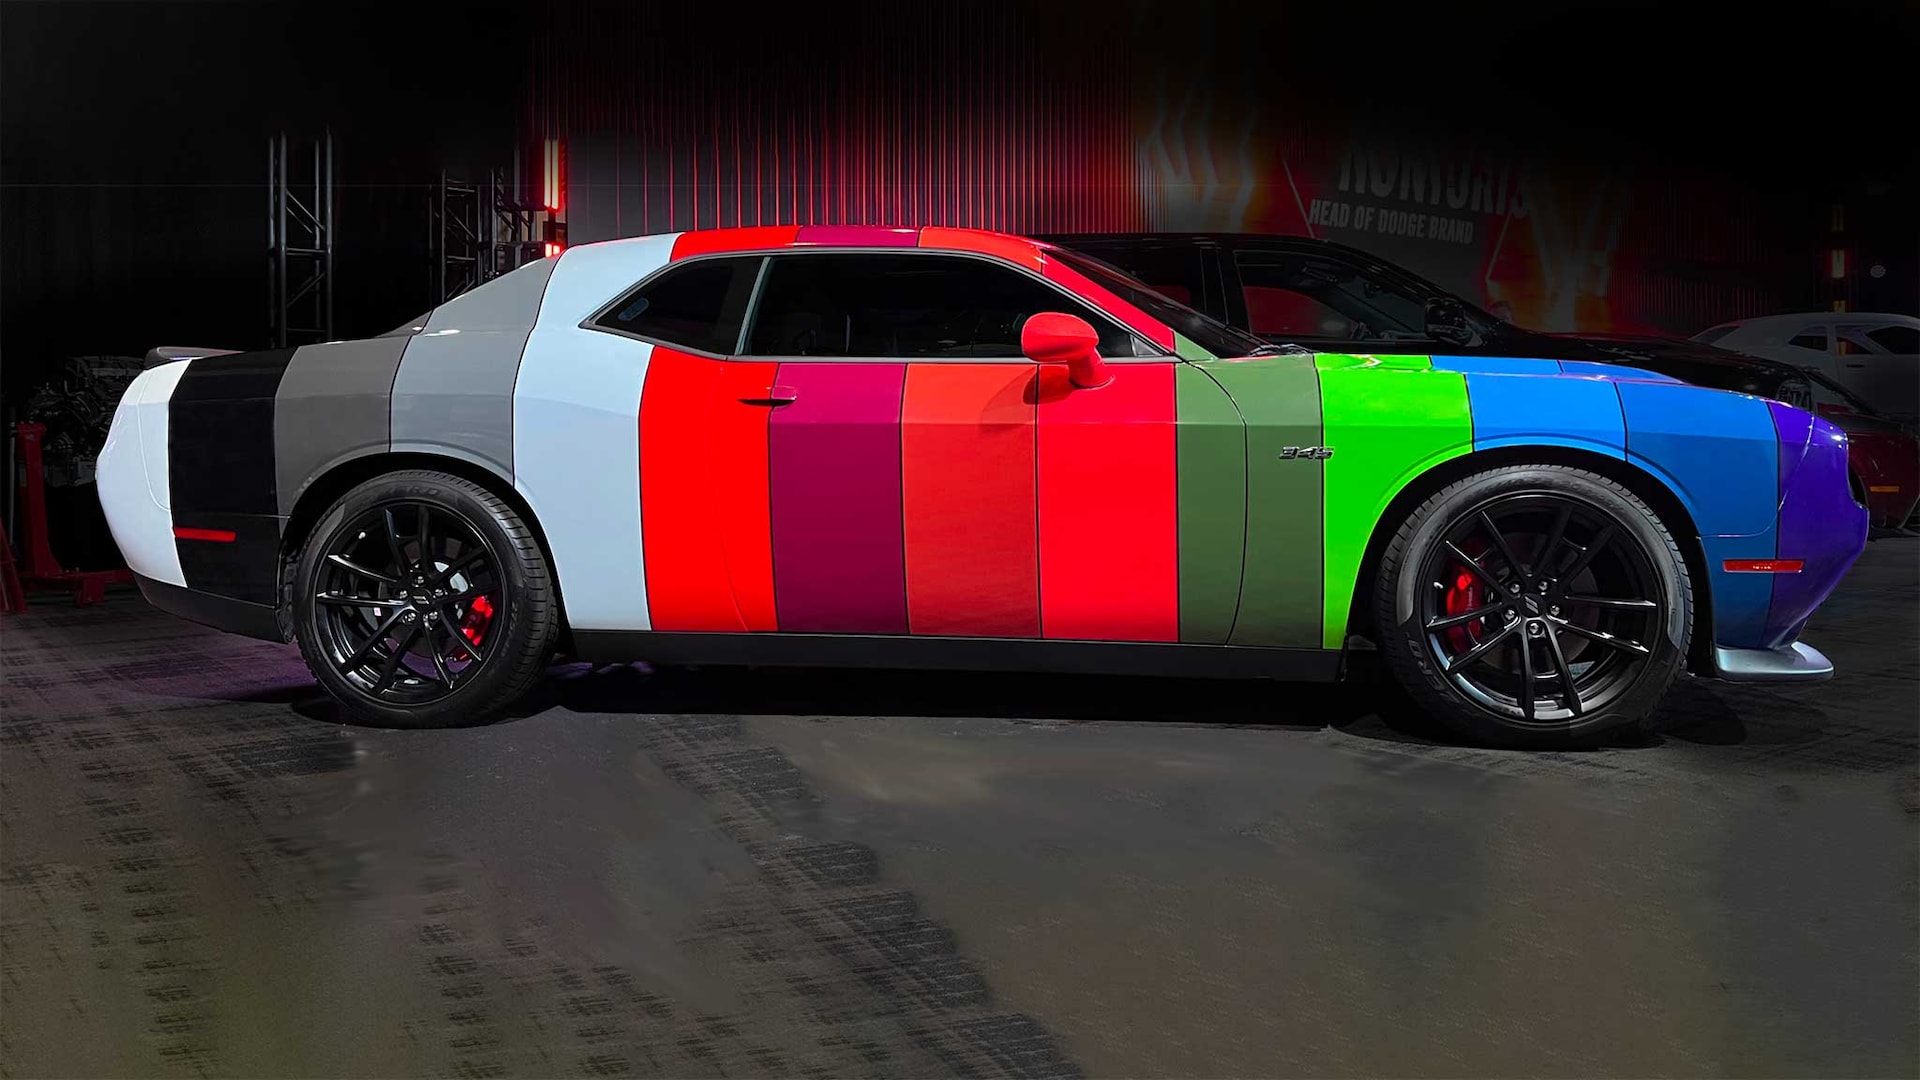 2023 Dodge Challenger Buyers Can Get a Vinyl Wrap With All 14 Challenger Paint Colors On It